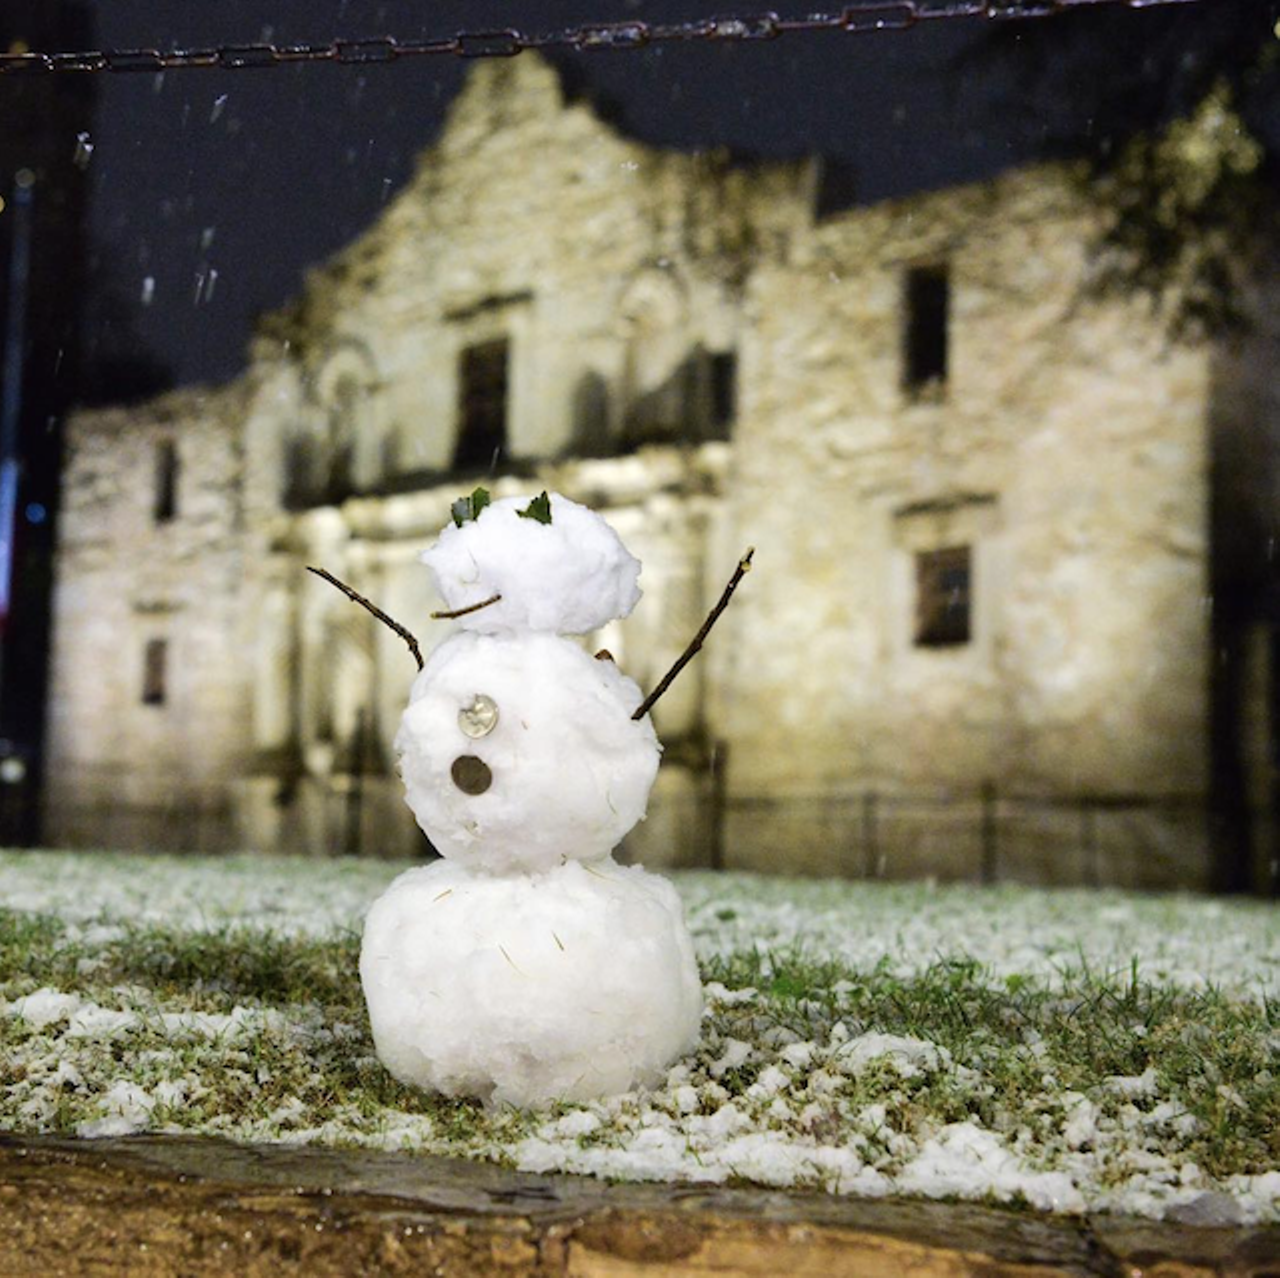 Make a tiny snowman in front of the Alamo
There’s a tiny snowman army building in front of the Alamo. If you care to contribute a soldier, you better do it quick — the snow’s melting fast.
Photo via amanda_wells_venegas/Instagram